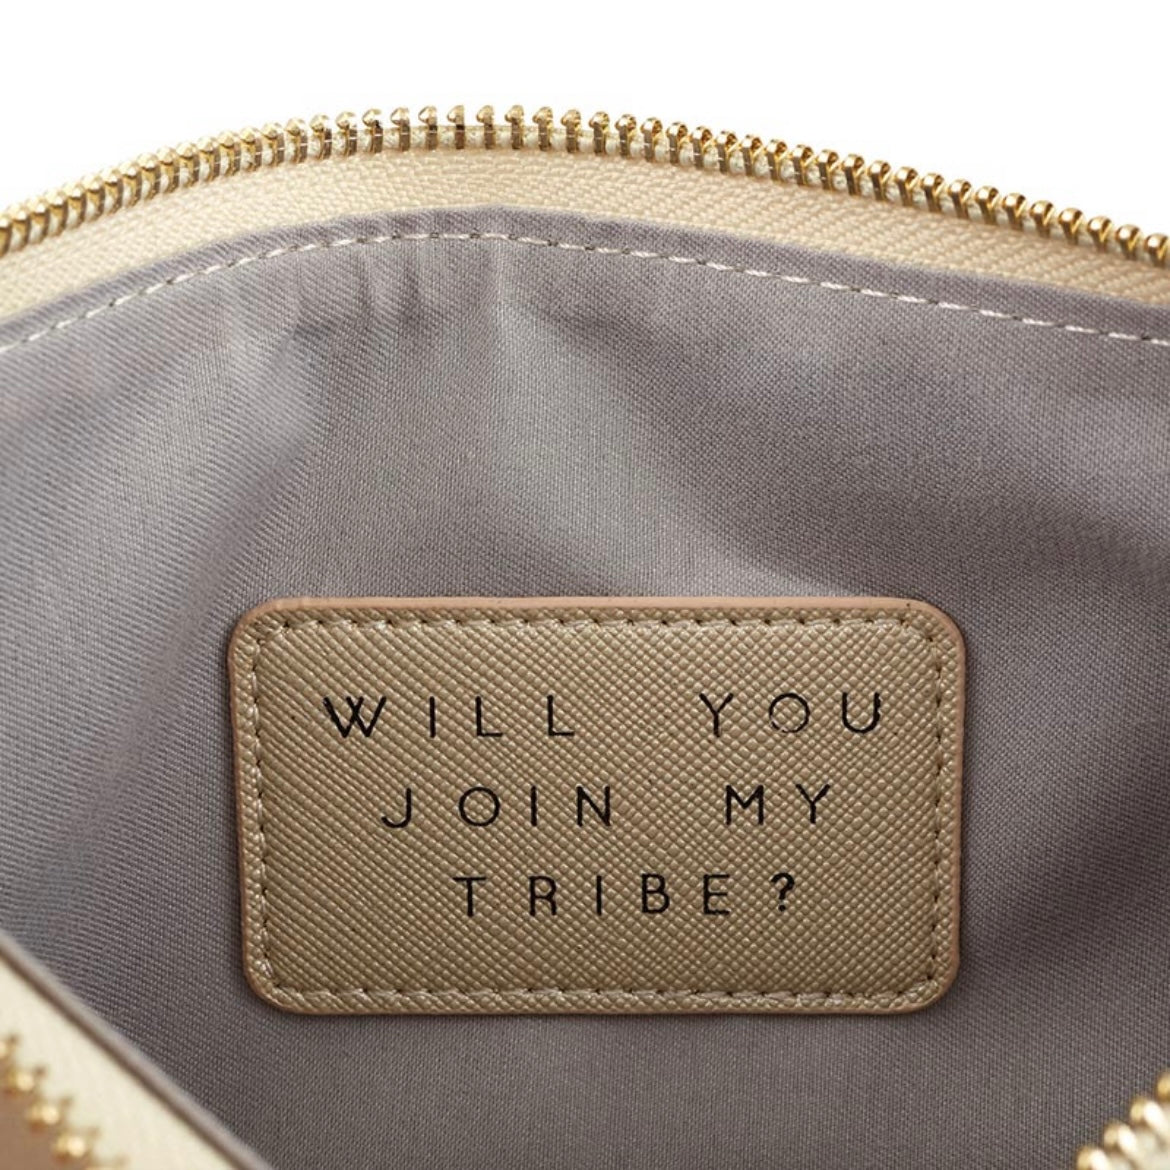 Bride Tribe Pouch Clutch